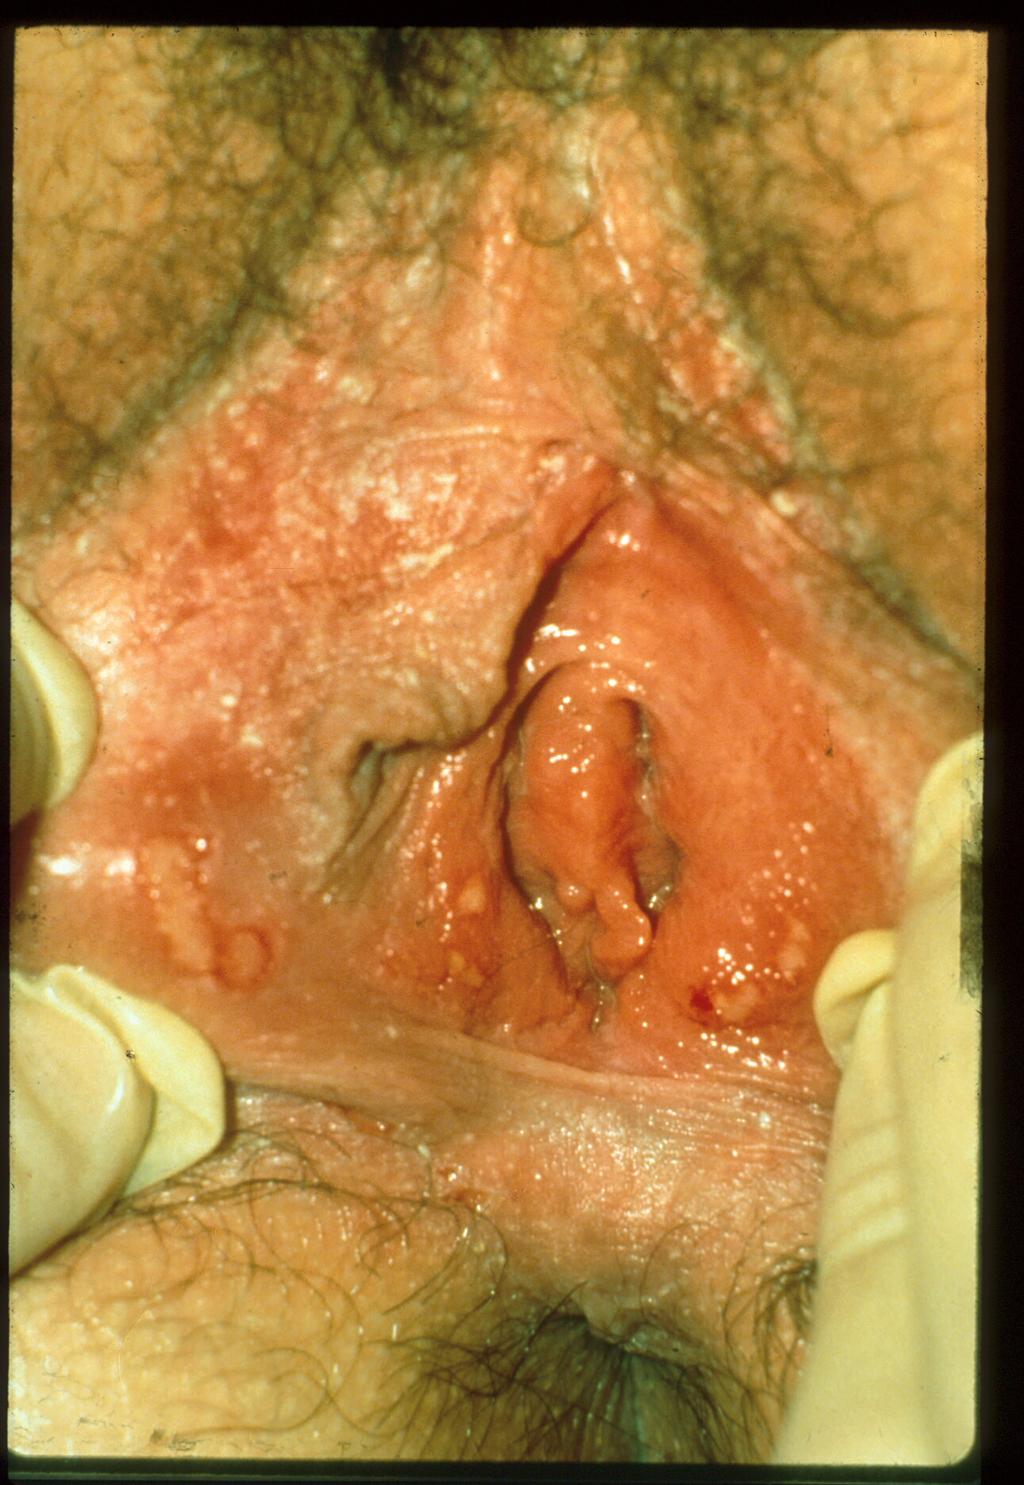 Primary HSV-2 Transmission of Genital HSV Requires contact of viable HSV and abraded skin/mucous.